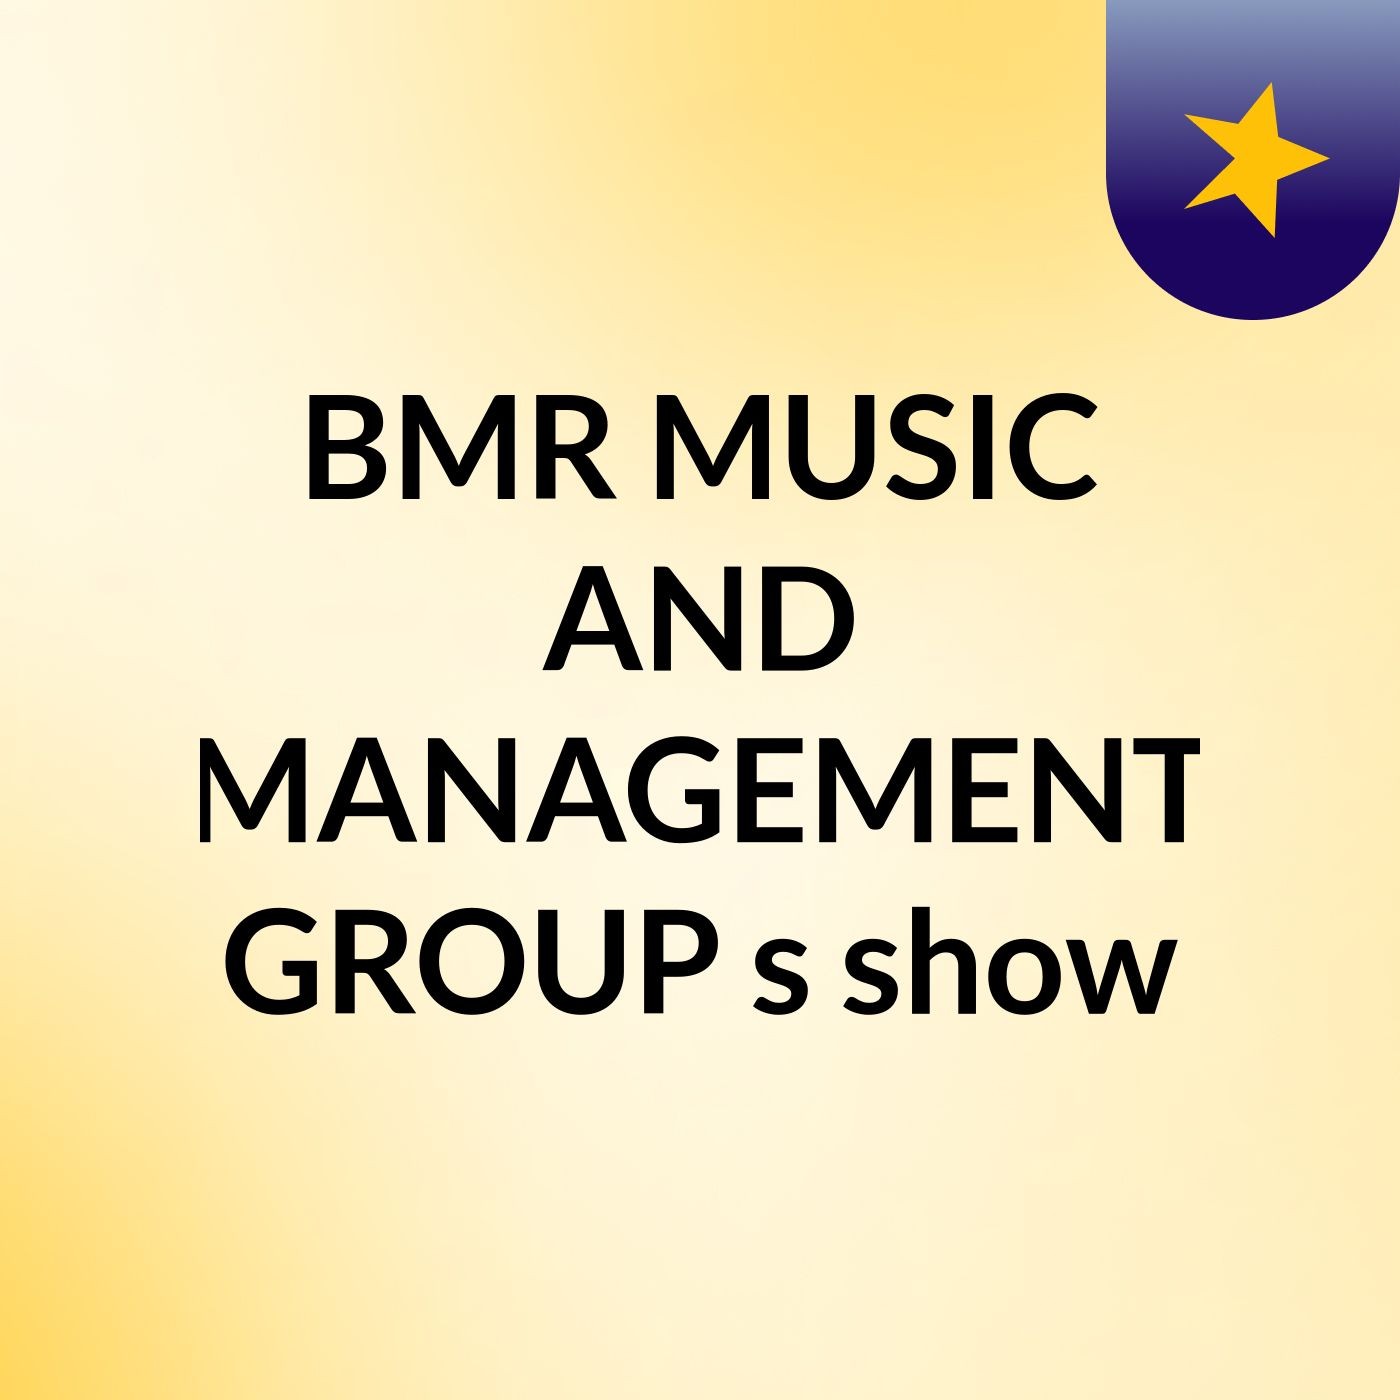 BMR MUSIC AND MANAGEMENT GROUP's show